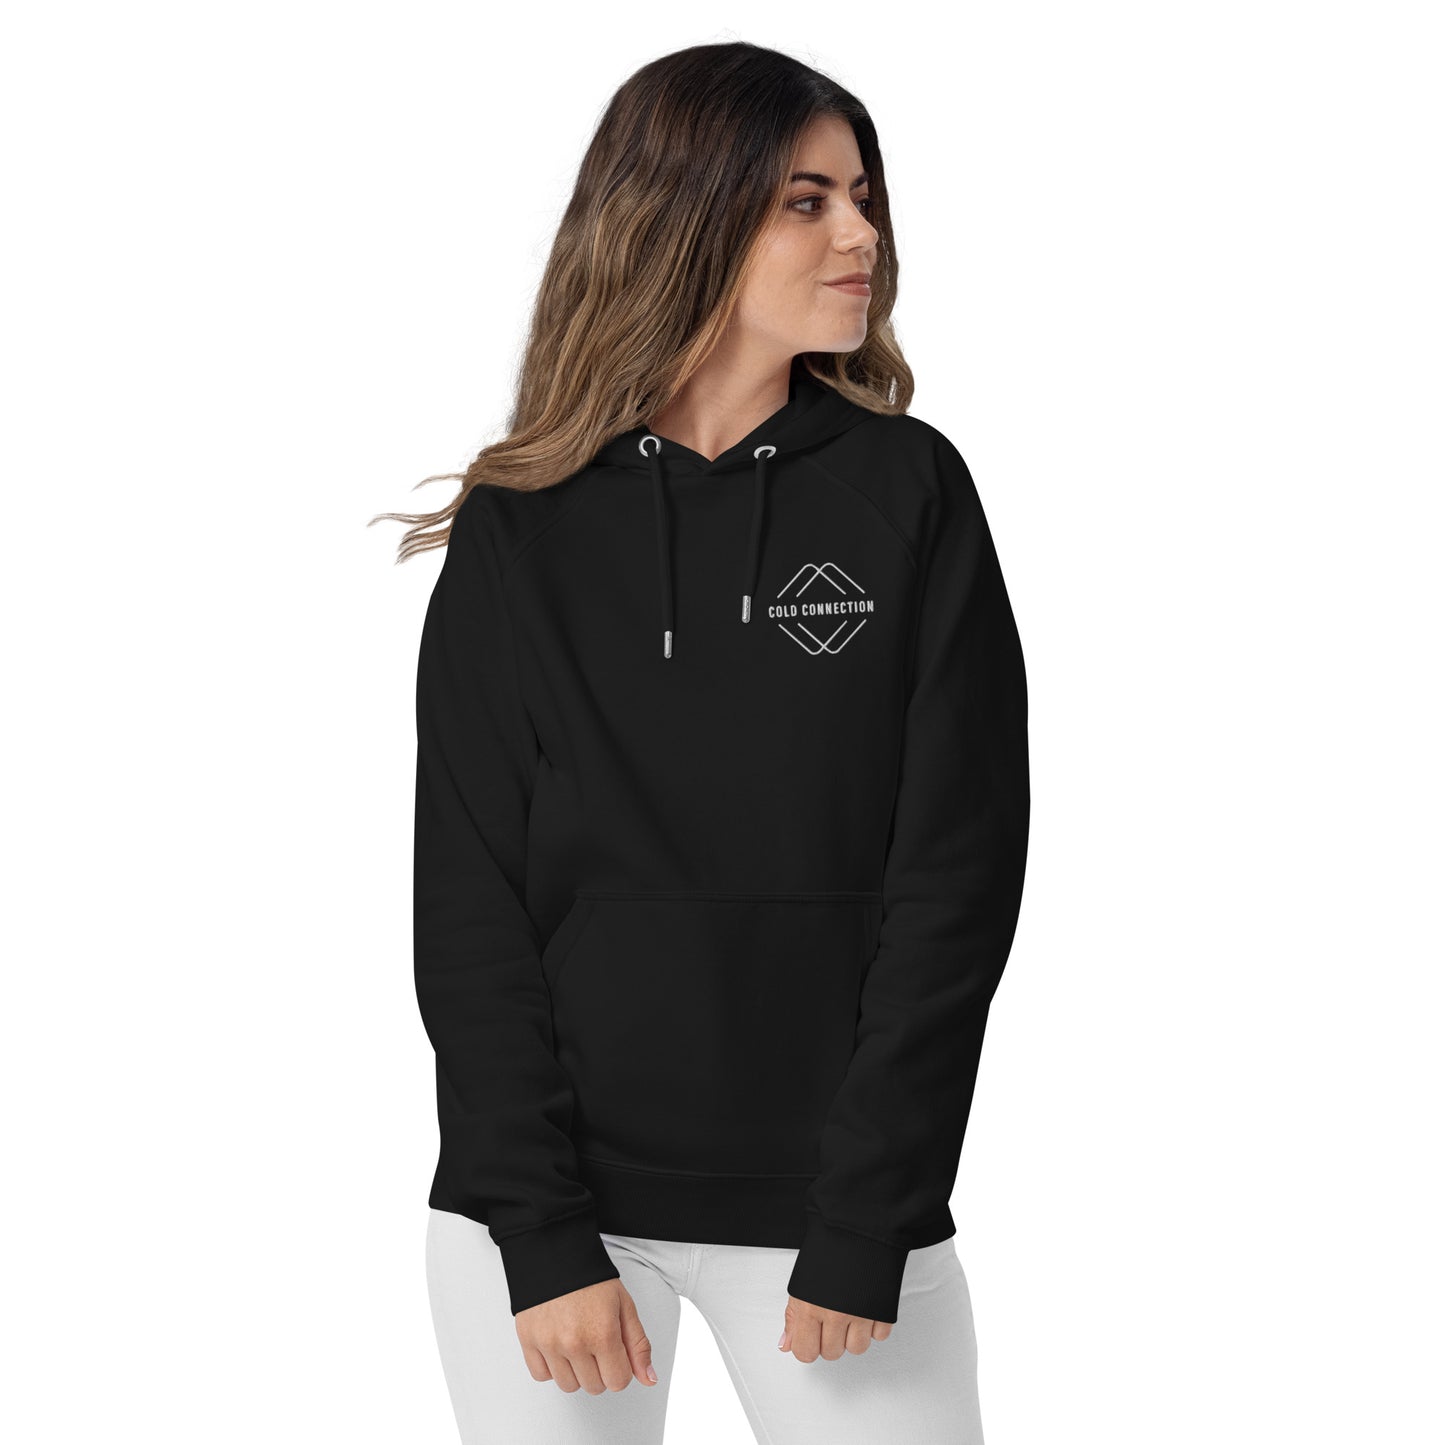 Cold Connection, official logo (embroidery), Unisex eco raglan hoodie